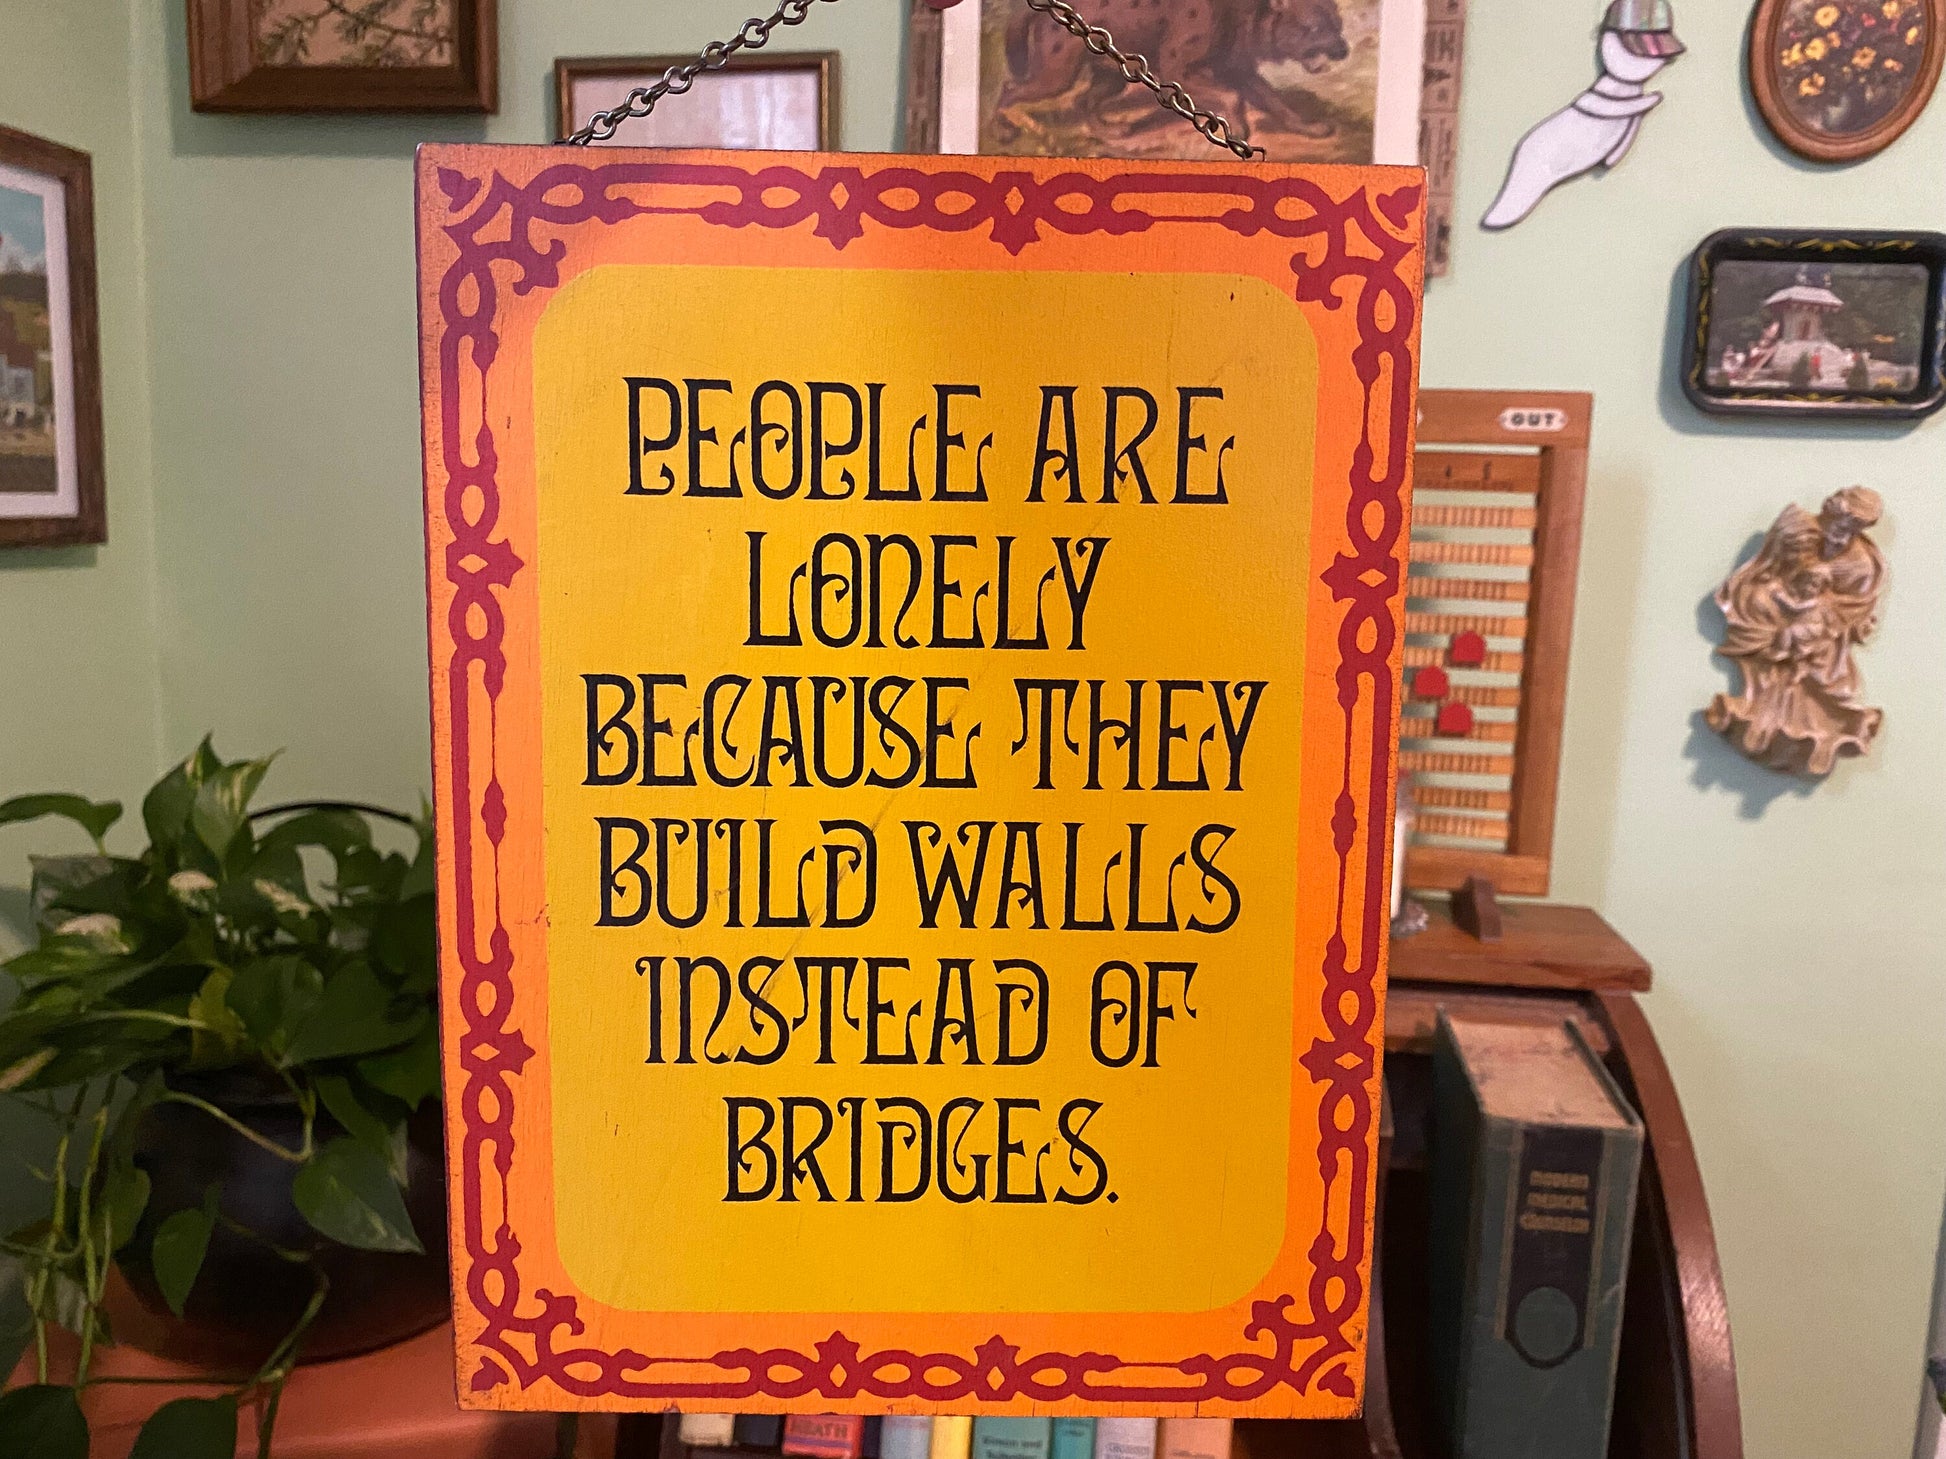 Vintage 1973 People are Lonely Because they Build Walls Instead of Bridges wall sign. Retro groovy 70s wall decor. Inspiration gift